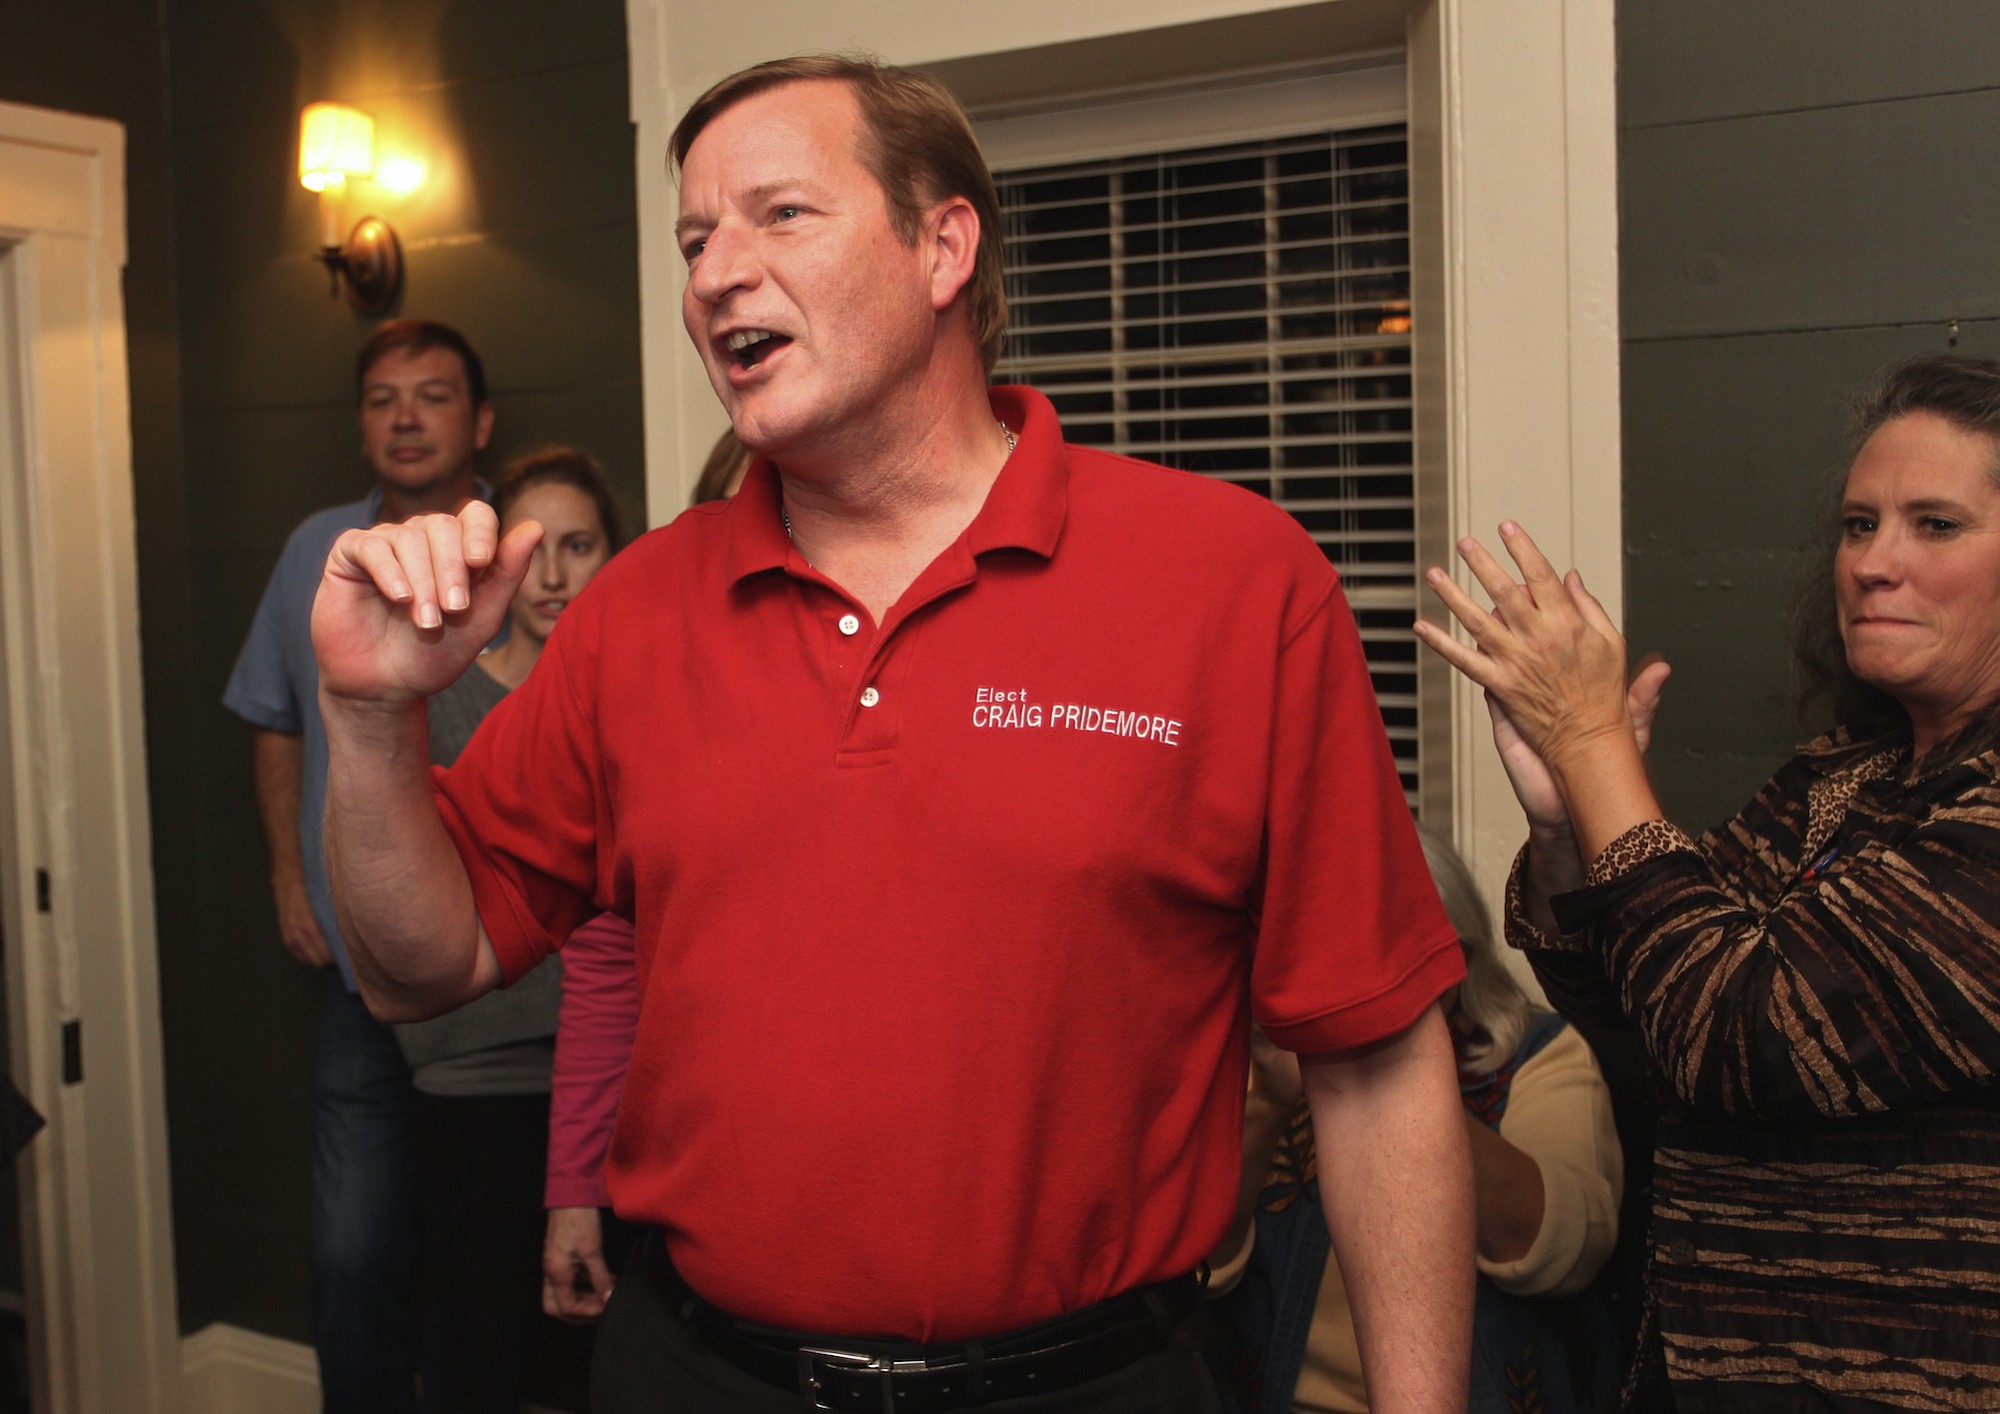 Steve Dipaola for The Columbian
Democrat Craig Pridemore and supporters react to early election results at the Grant House. After the first returns, Pridemore has a small lead over Republican Jeanne Stewart.